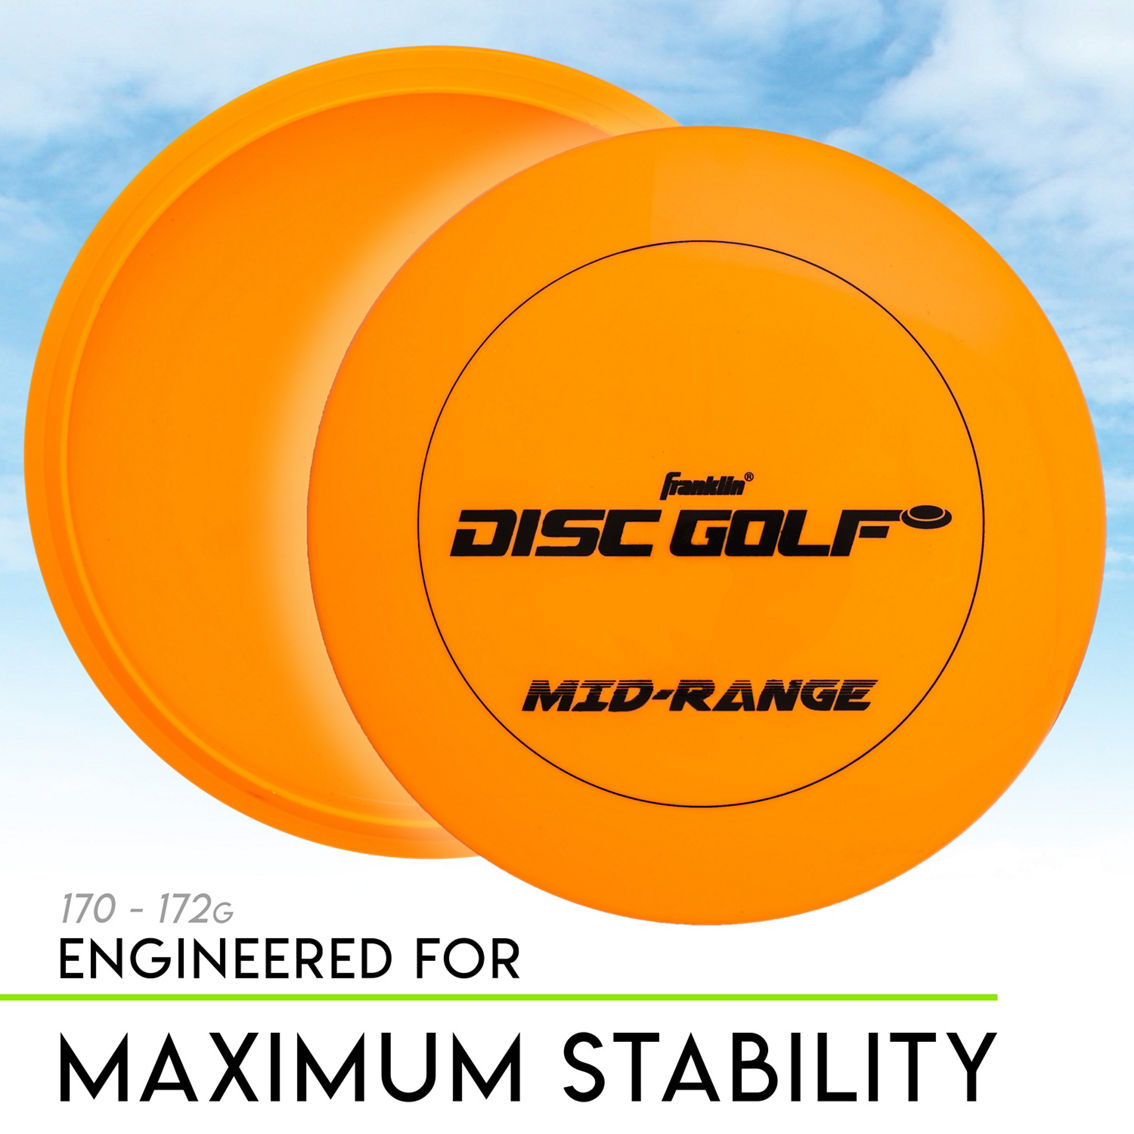 Franklin Disc Golf 3 pc. Set with Putter, Mid Range and Driver Discs - Image 4 of 9